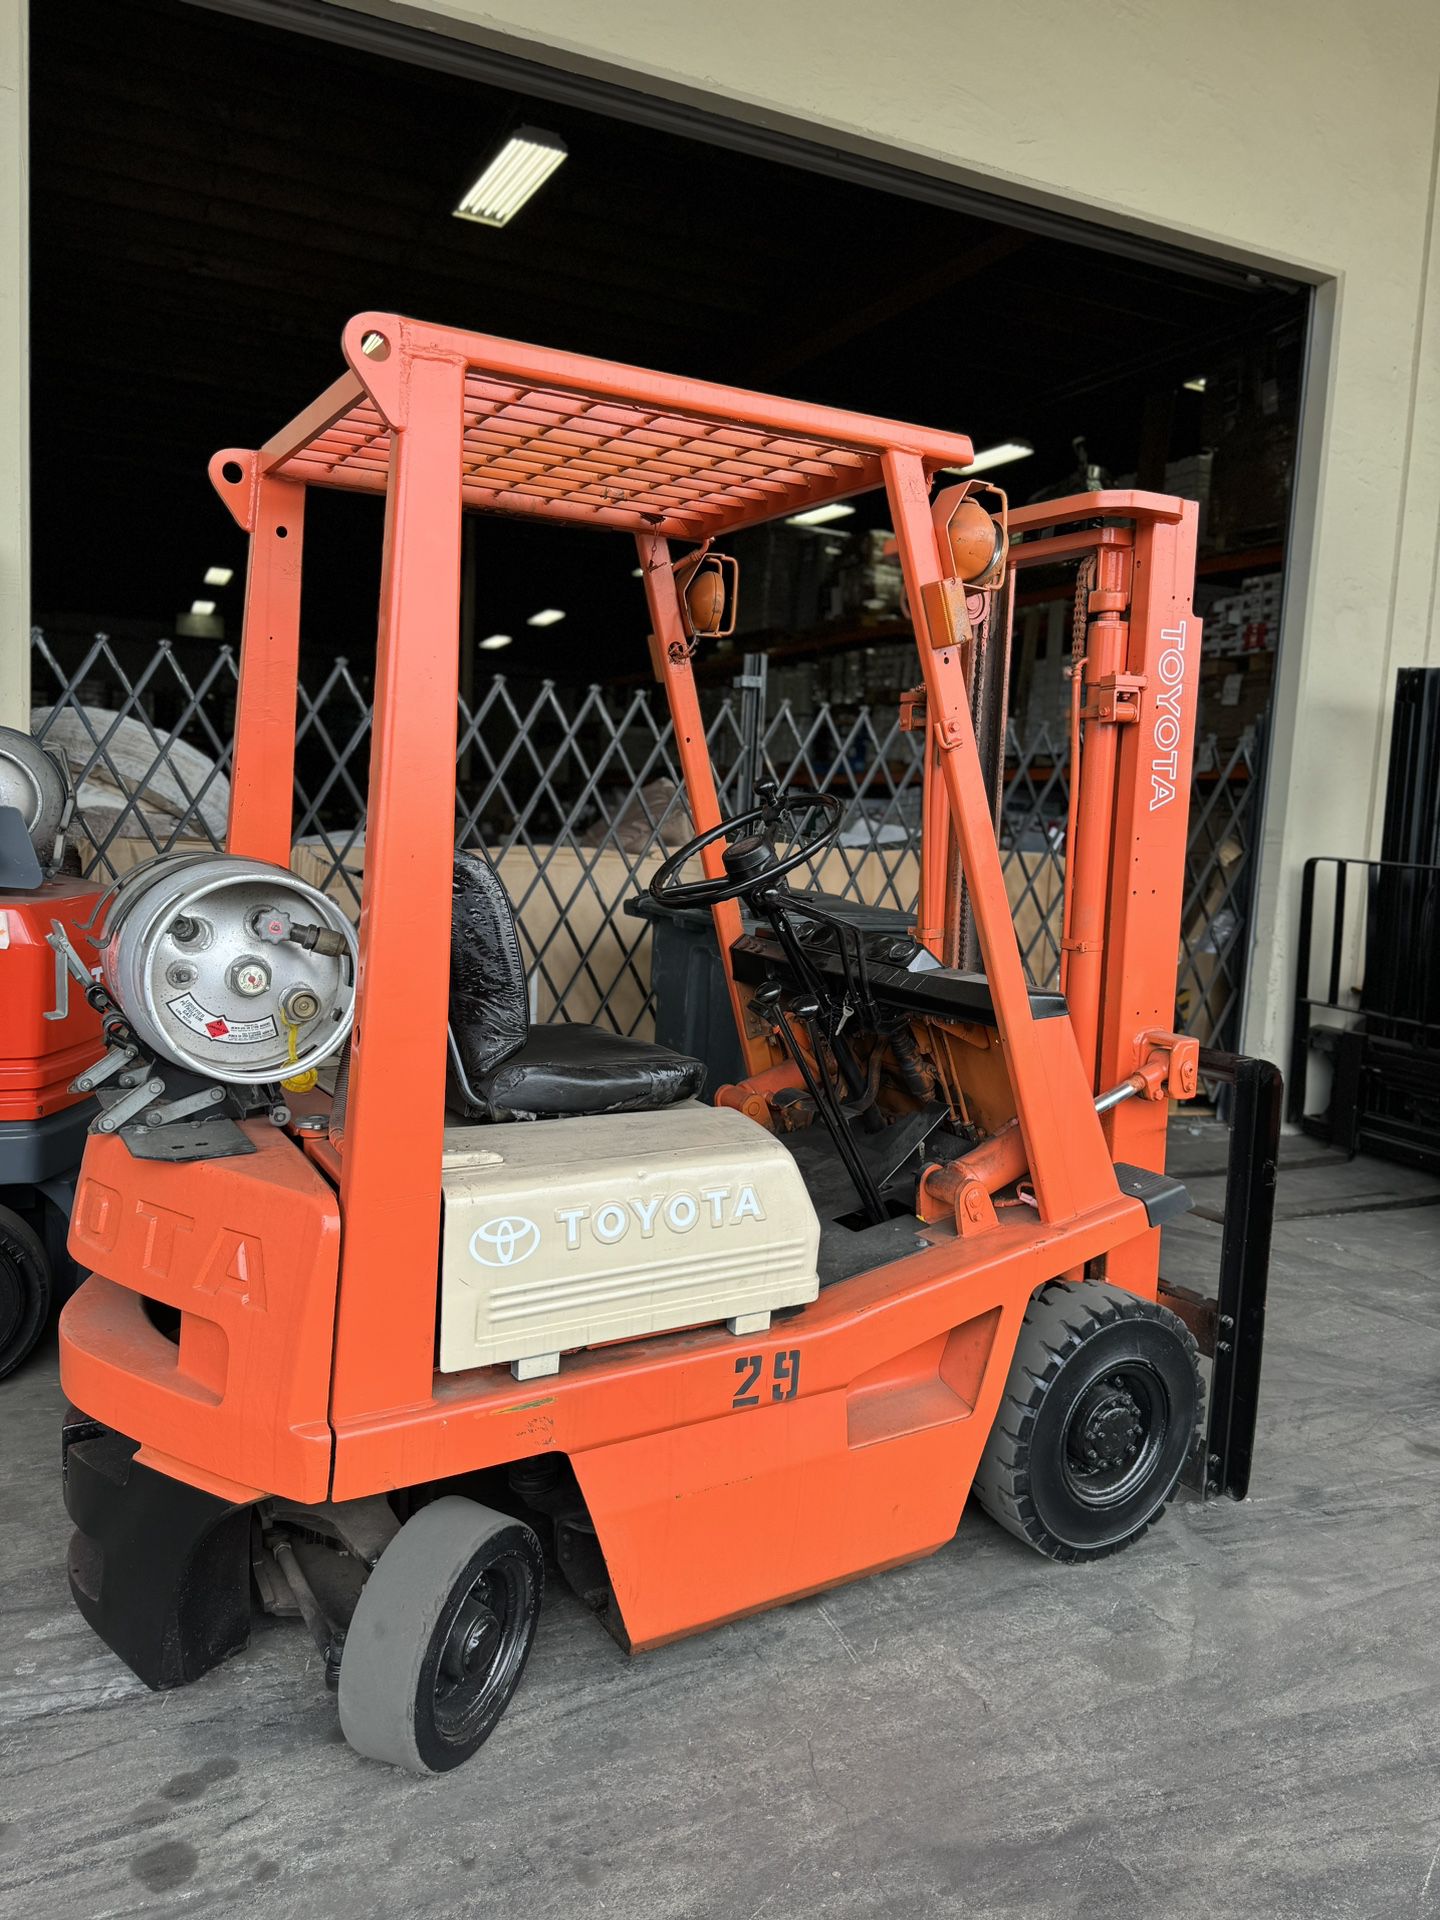 NISSAN Forklifts with Warranty and Free Delivery!